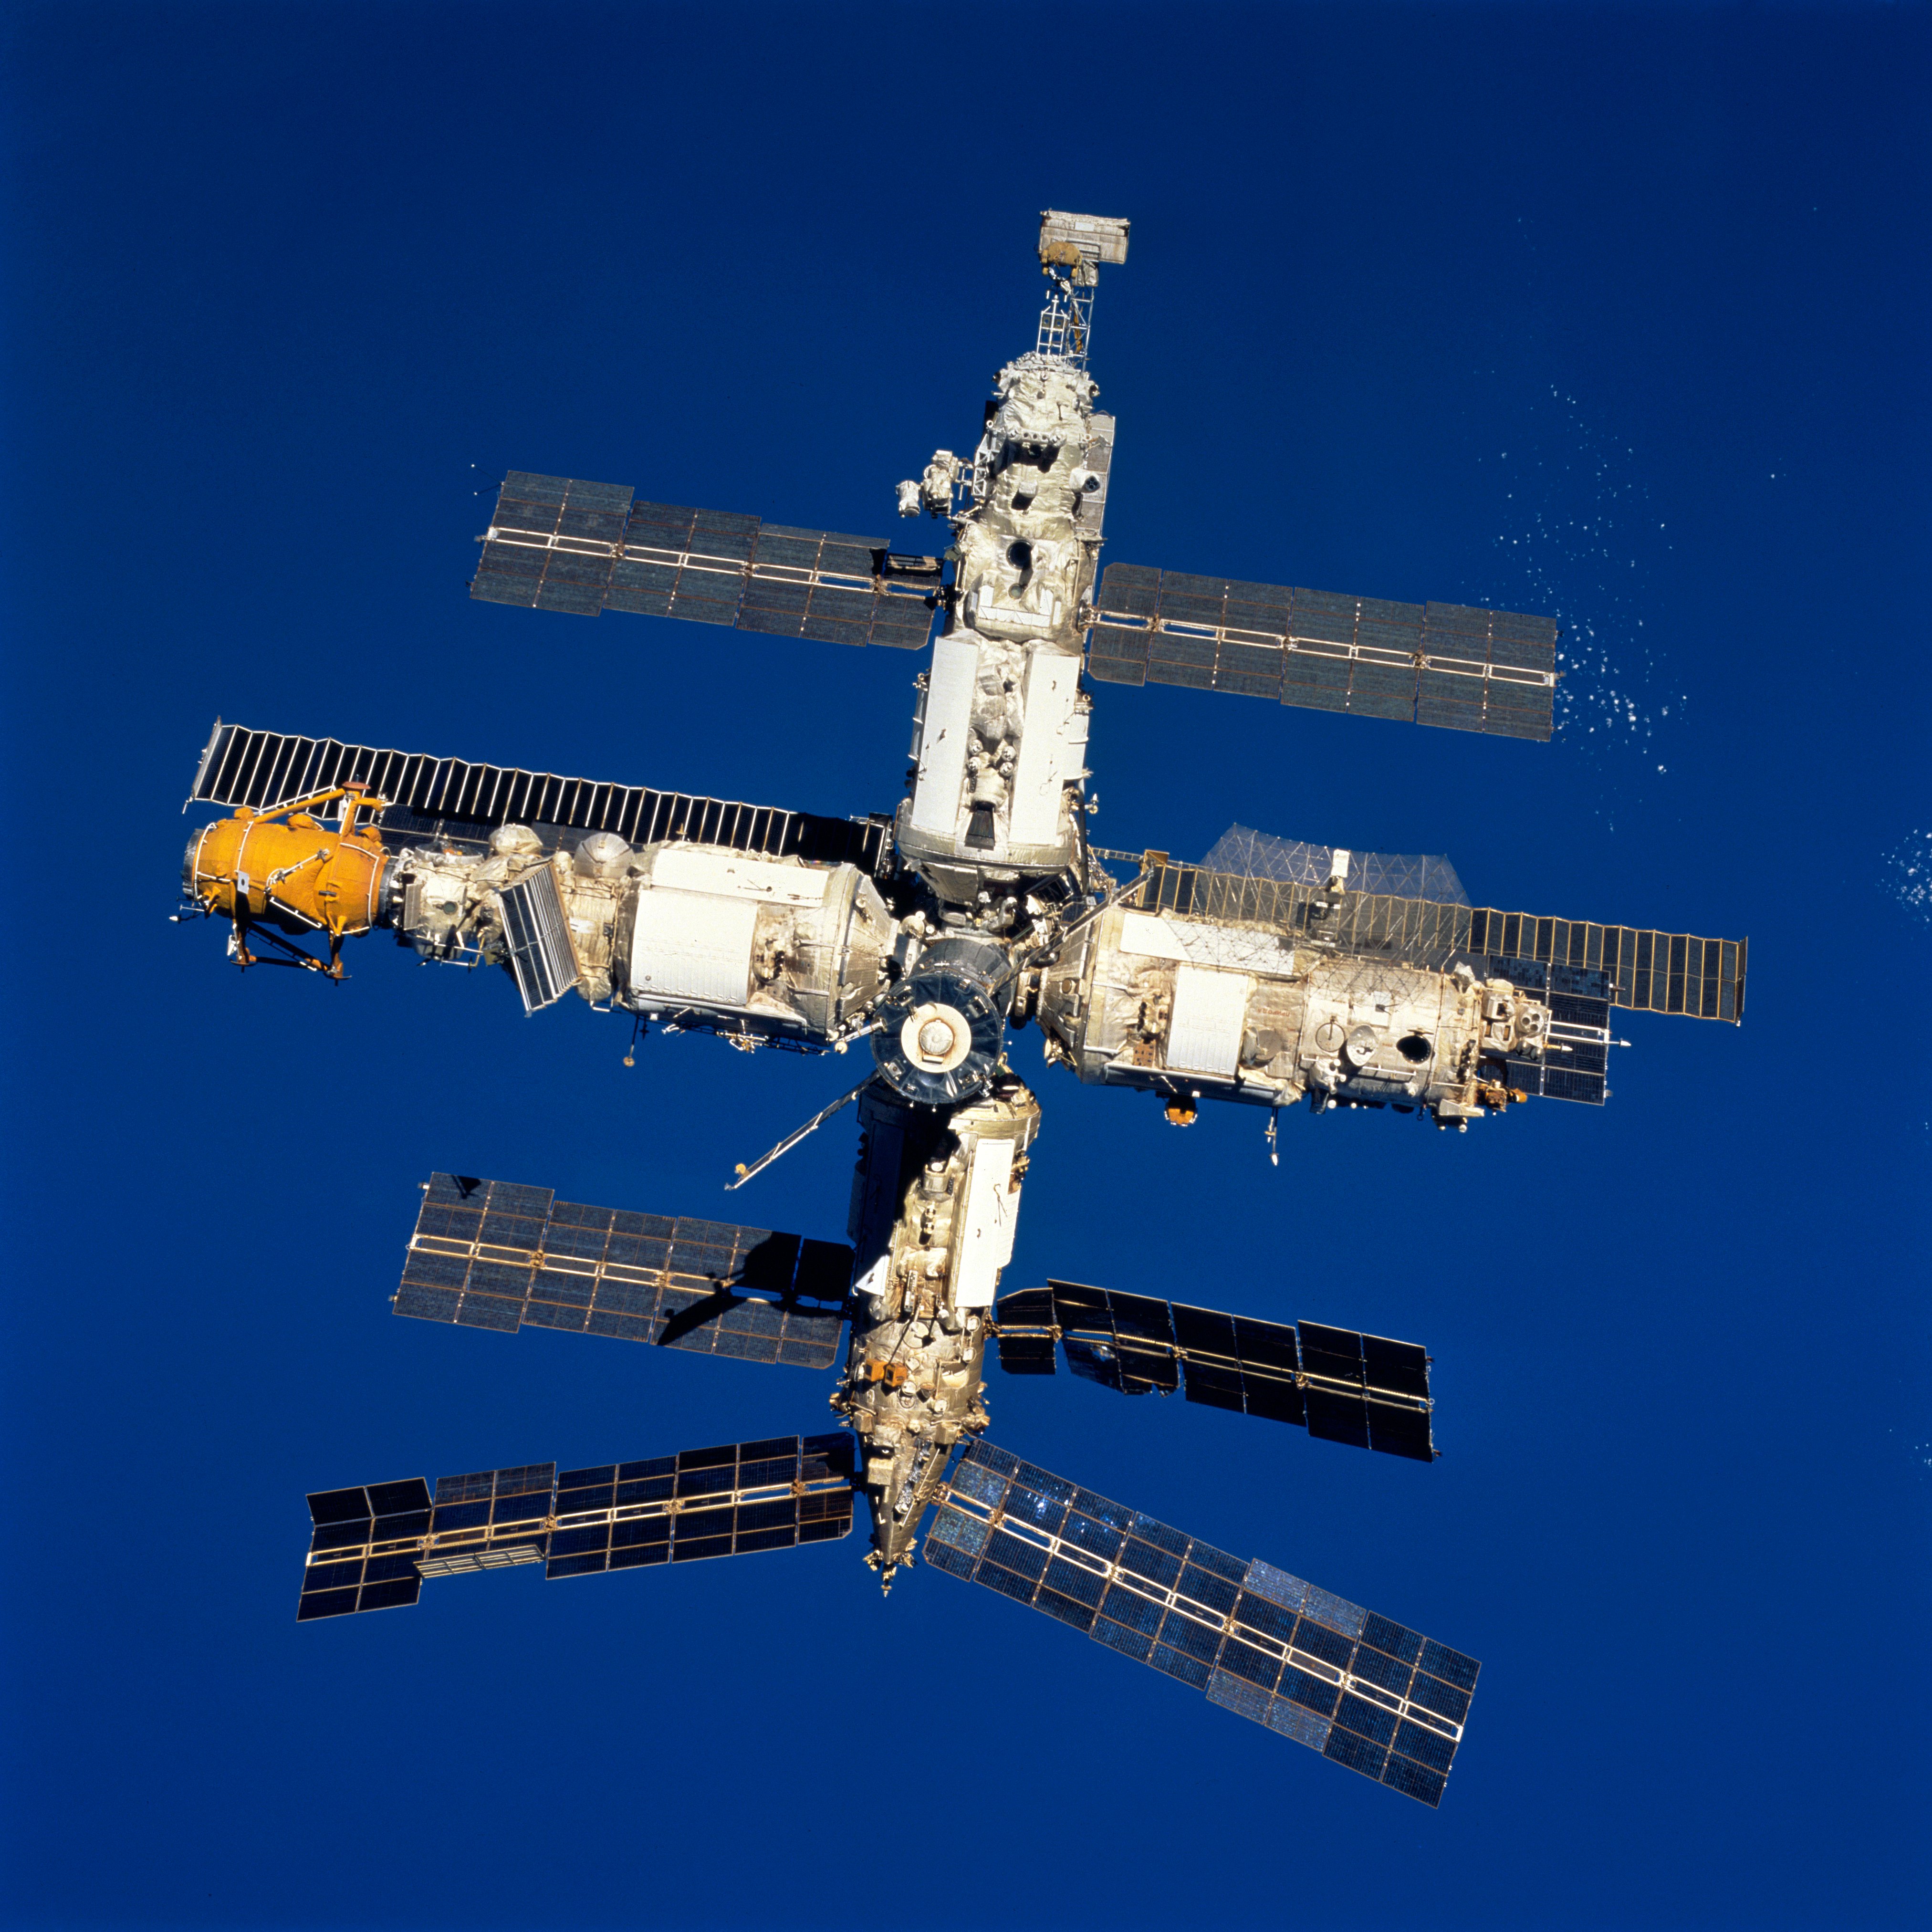 Mir seen on STS-89